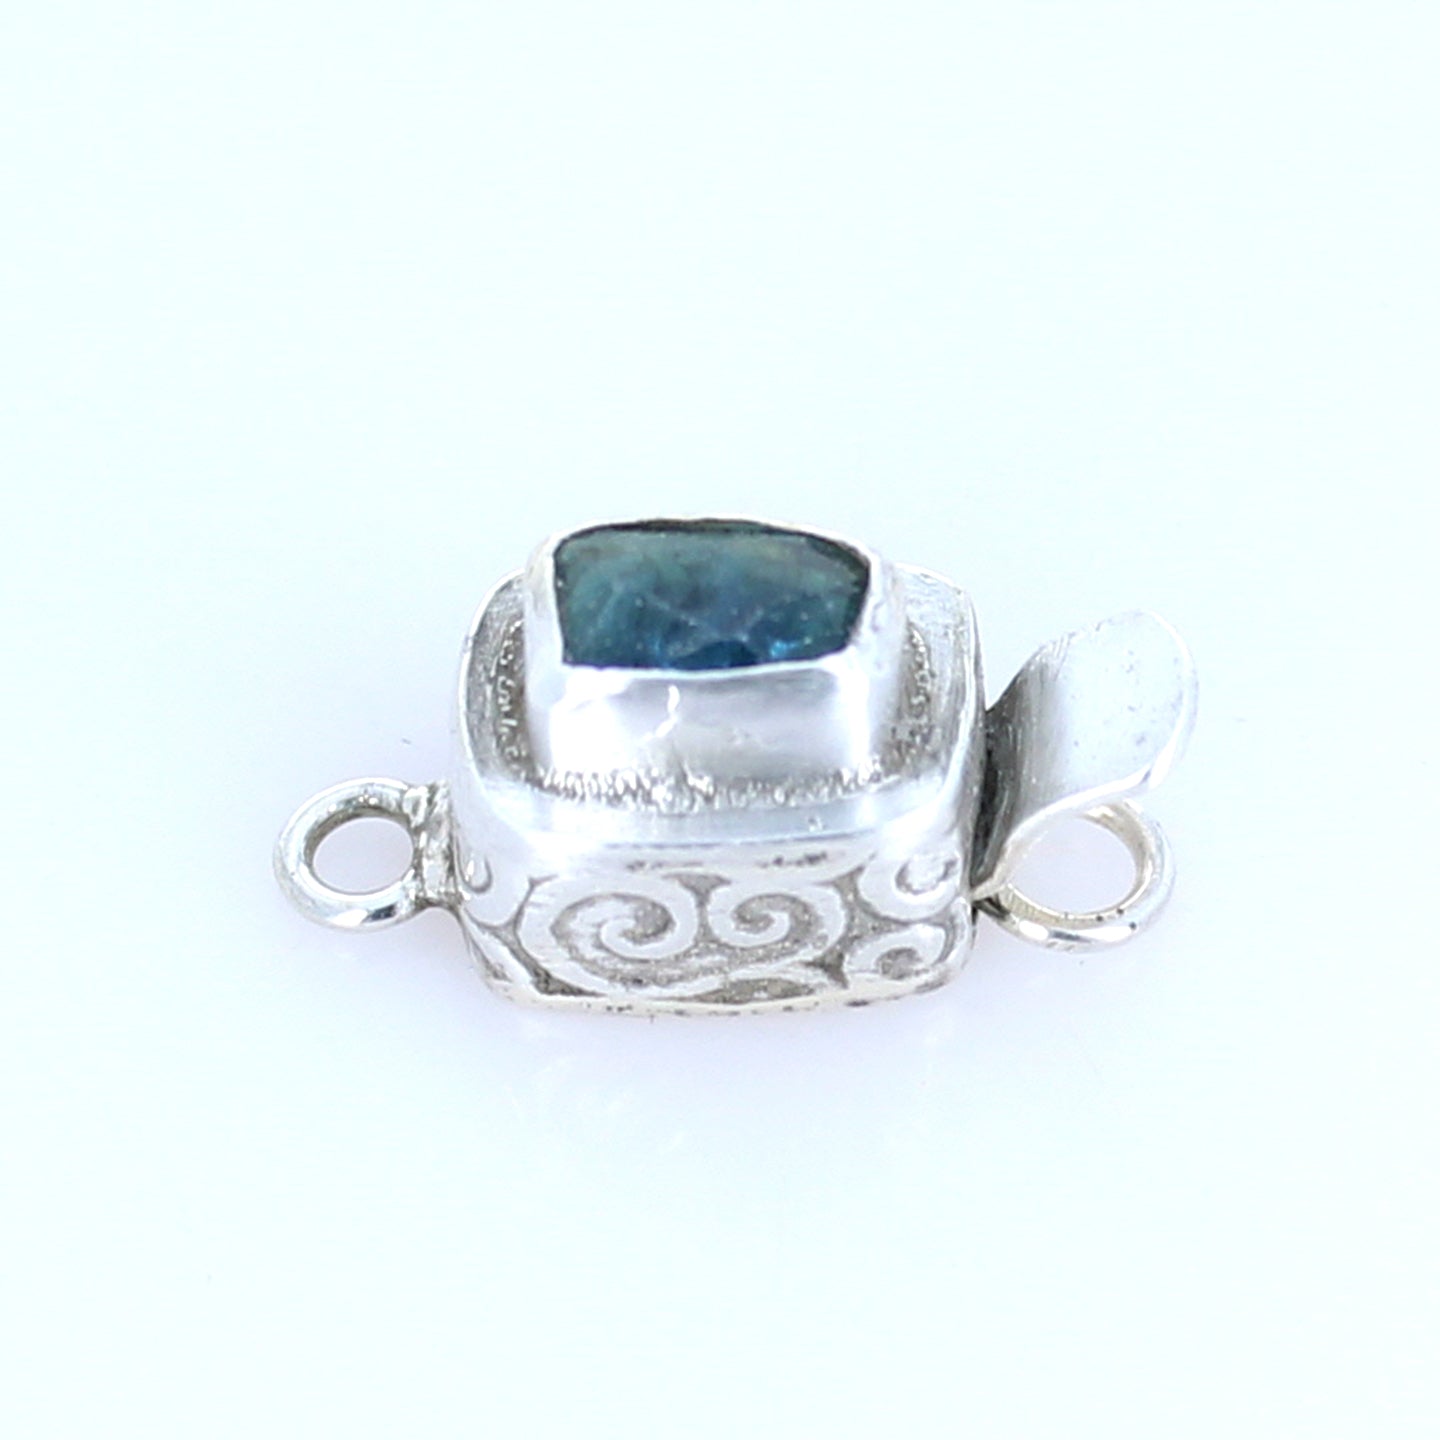 AAA Blue Tourmaline Faceted Sterling Clasp Patterned Design #2 -NewWorldGems